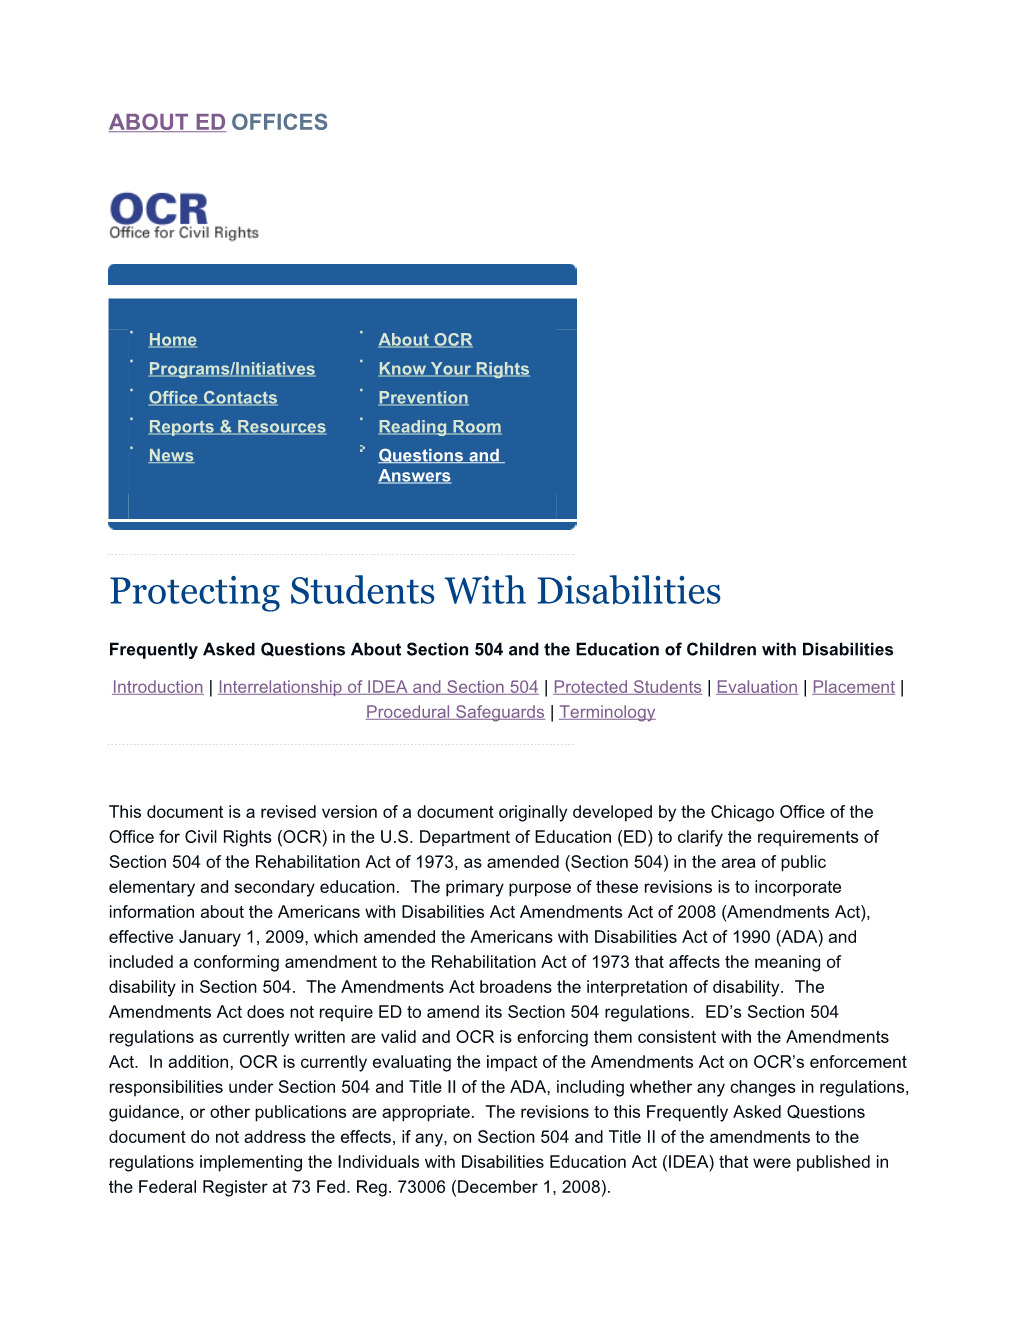 Frequently Asked Questions About Section 504 and the Education of Children with Disabilities